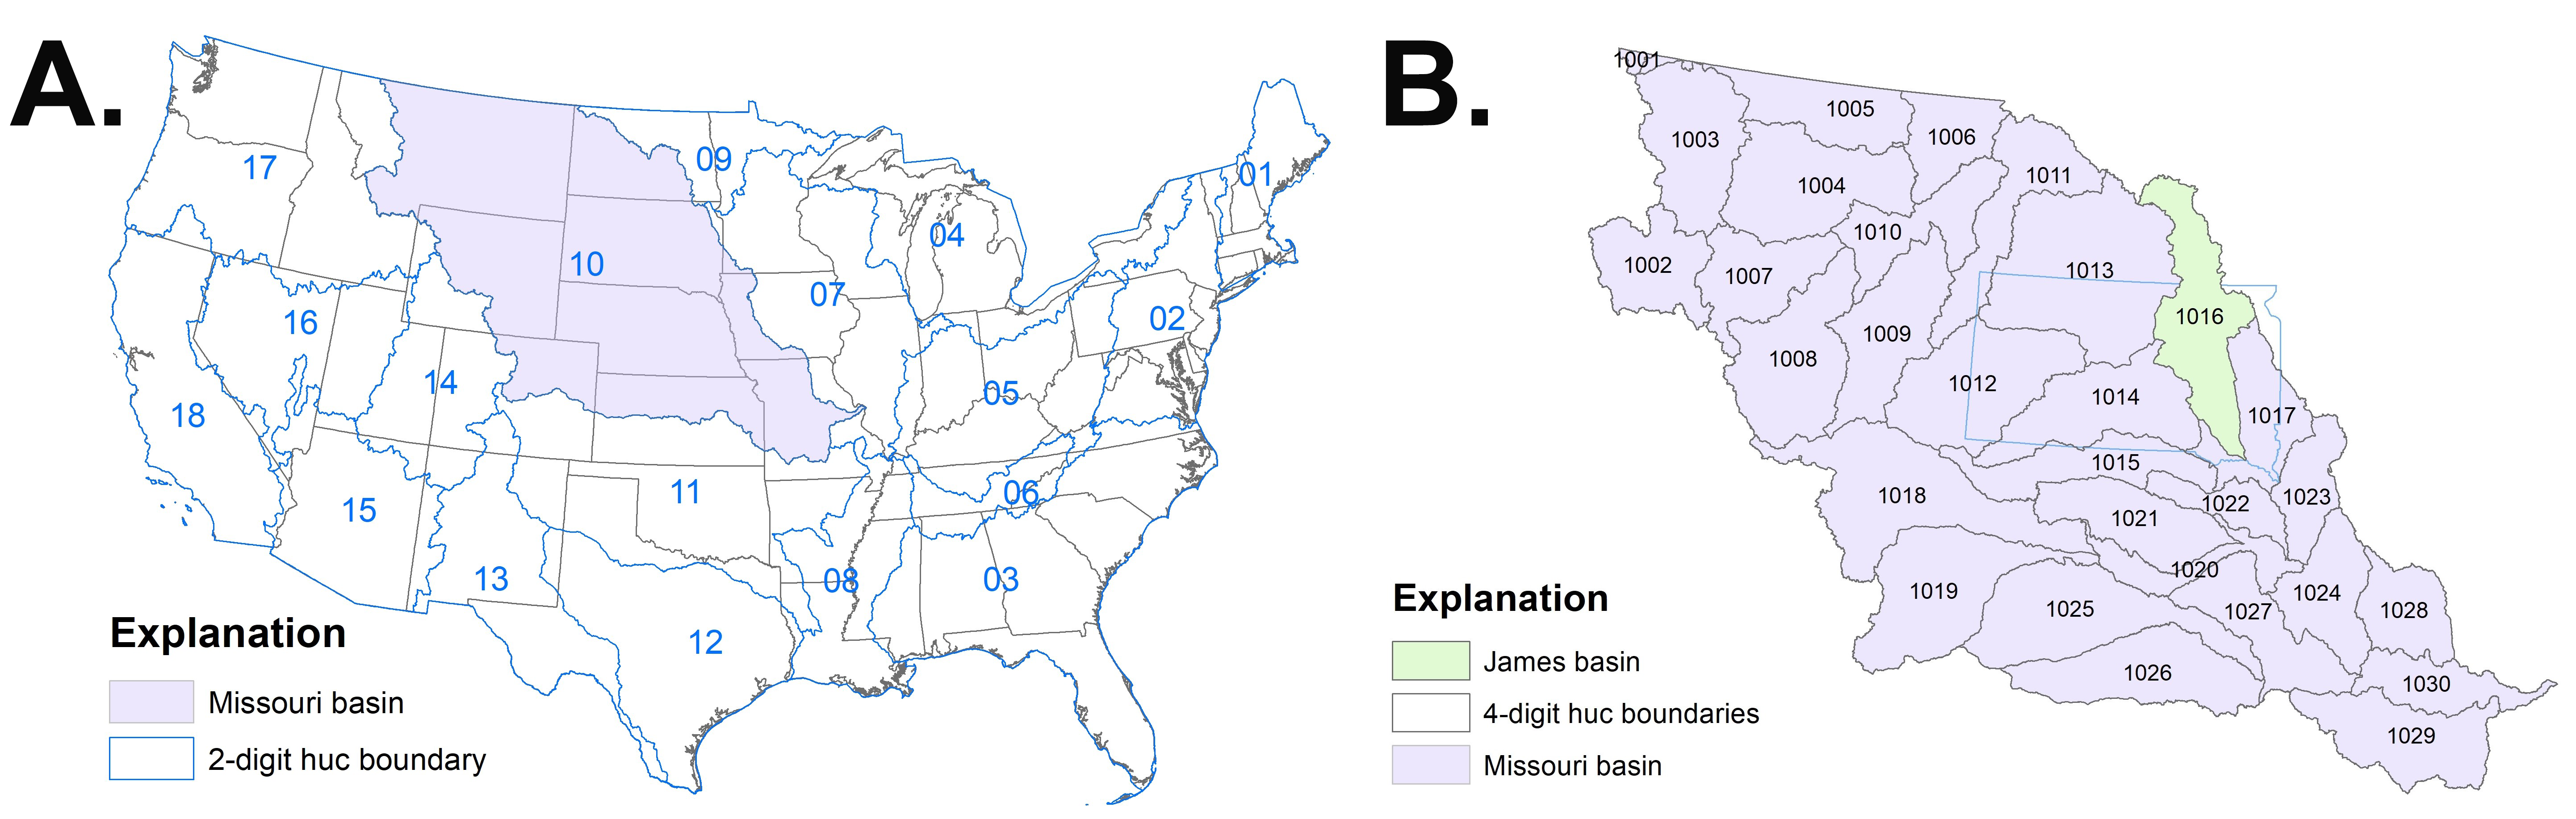 Left: Image of 2-digit HUC boundaries in continental United States. Right: Image of 4-digit HUC boundaries in the Missouri basin. For a complete description of this graphic, please call SDSU Extension at 605-688-4792.